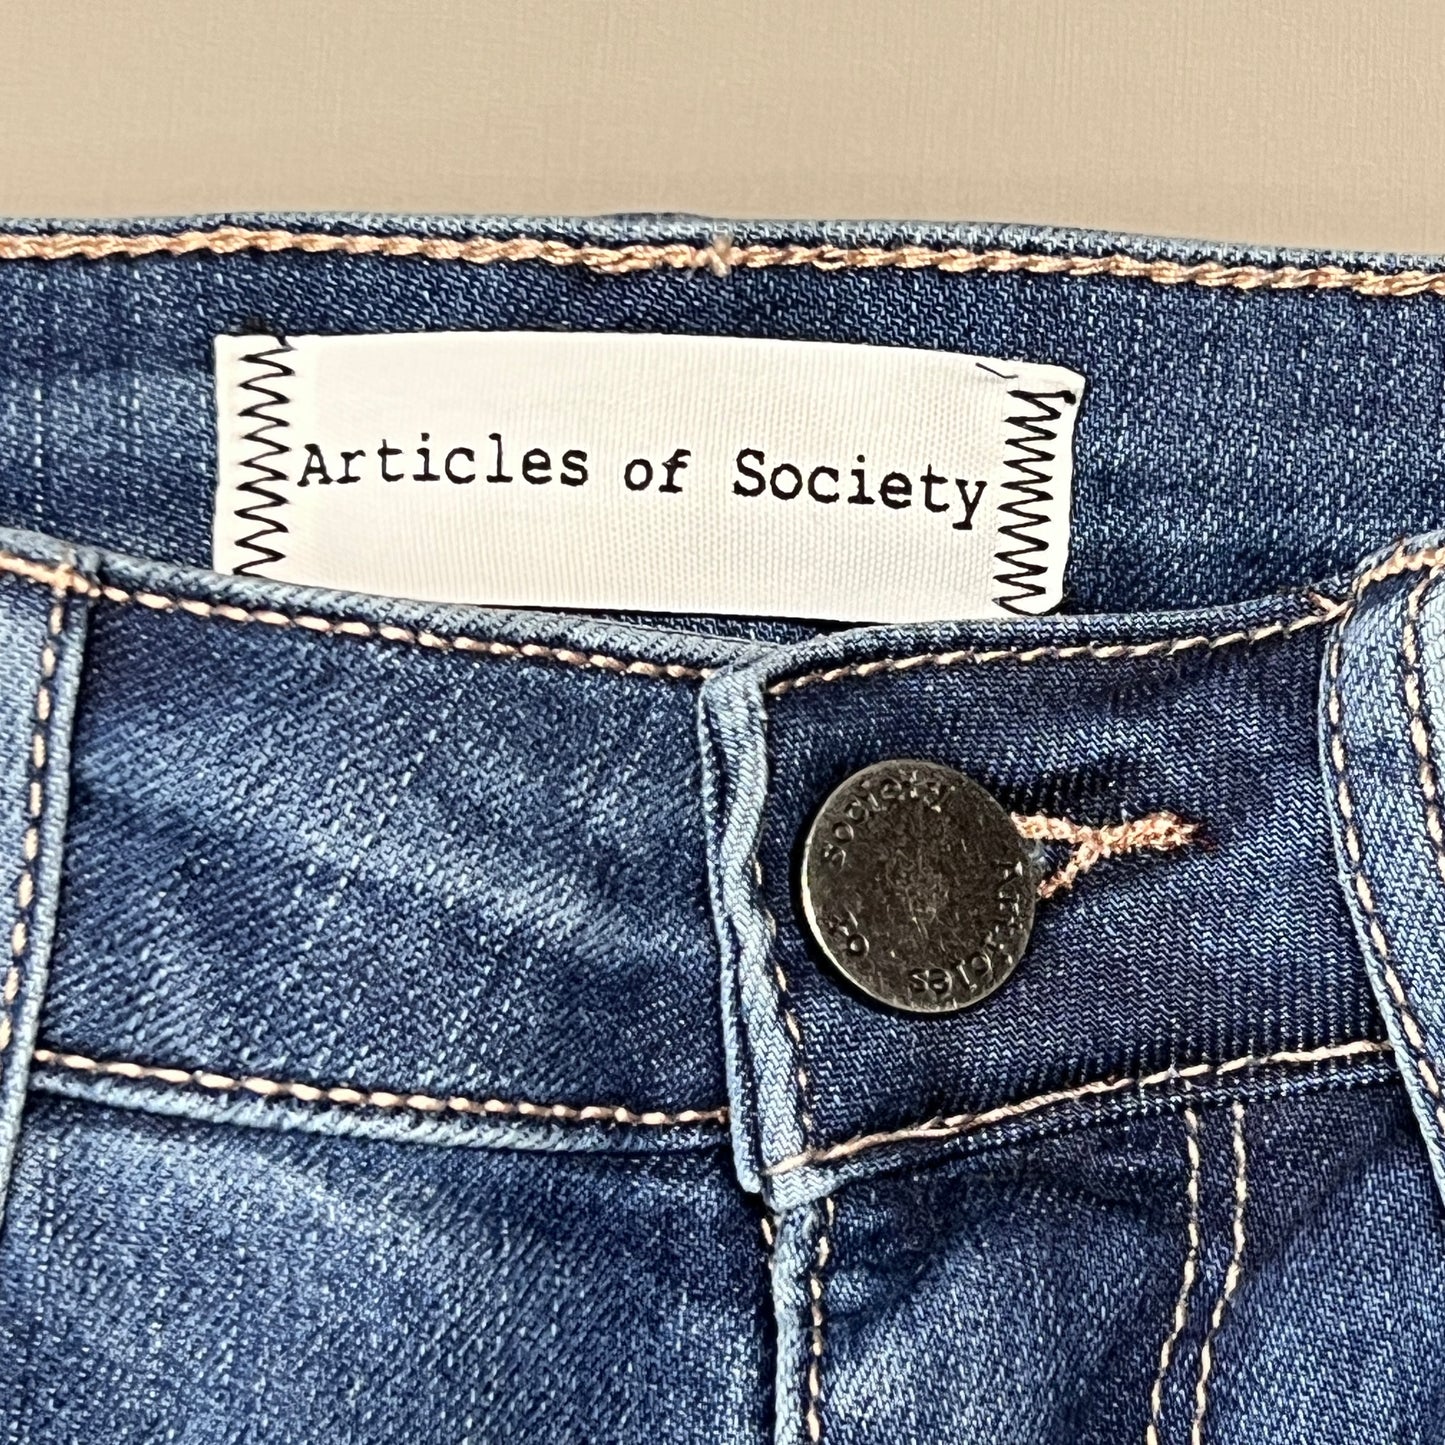 ARTICLES OF SOCIETY Pearl City Denim Jeans Women's Sz 26 Blue 4018PLV-712 (New)